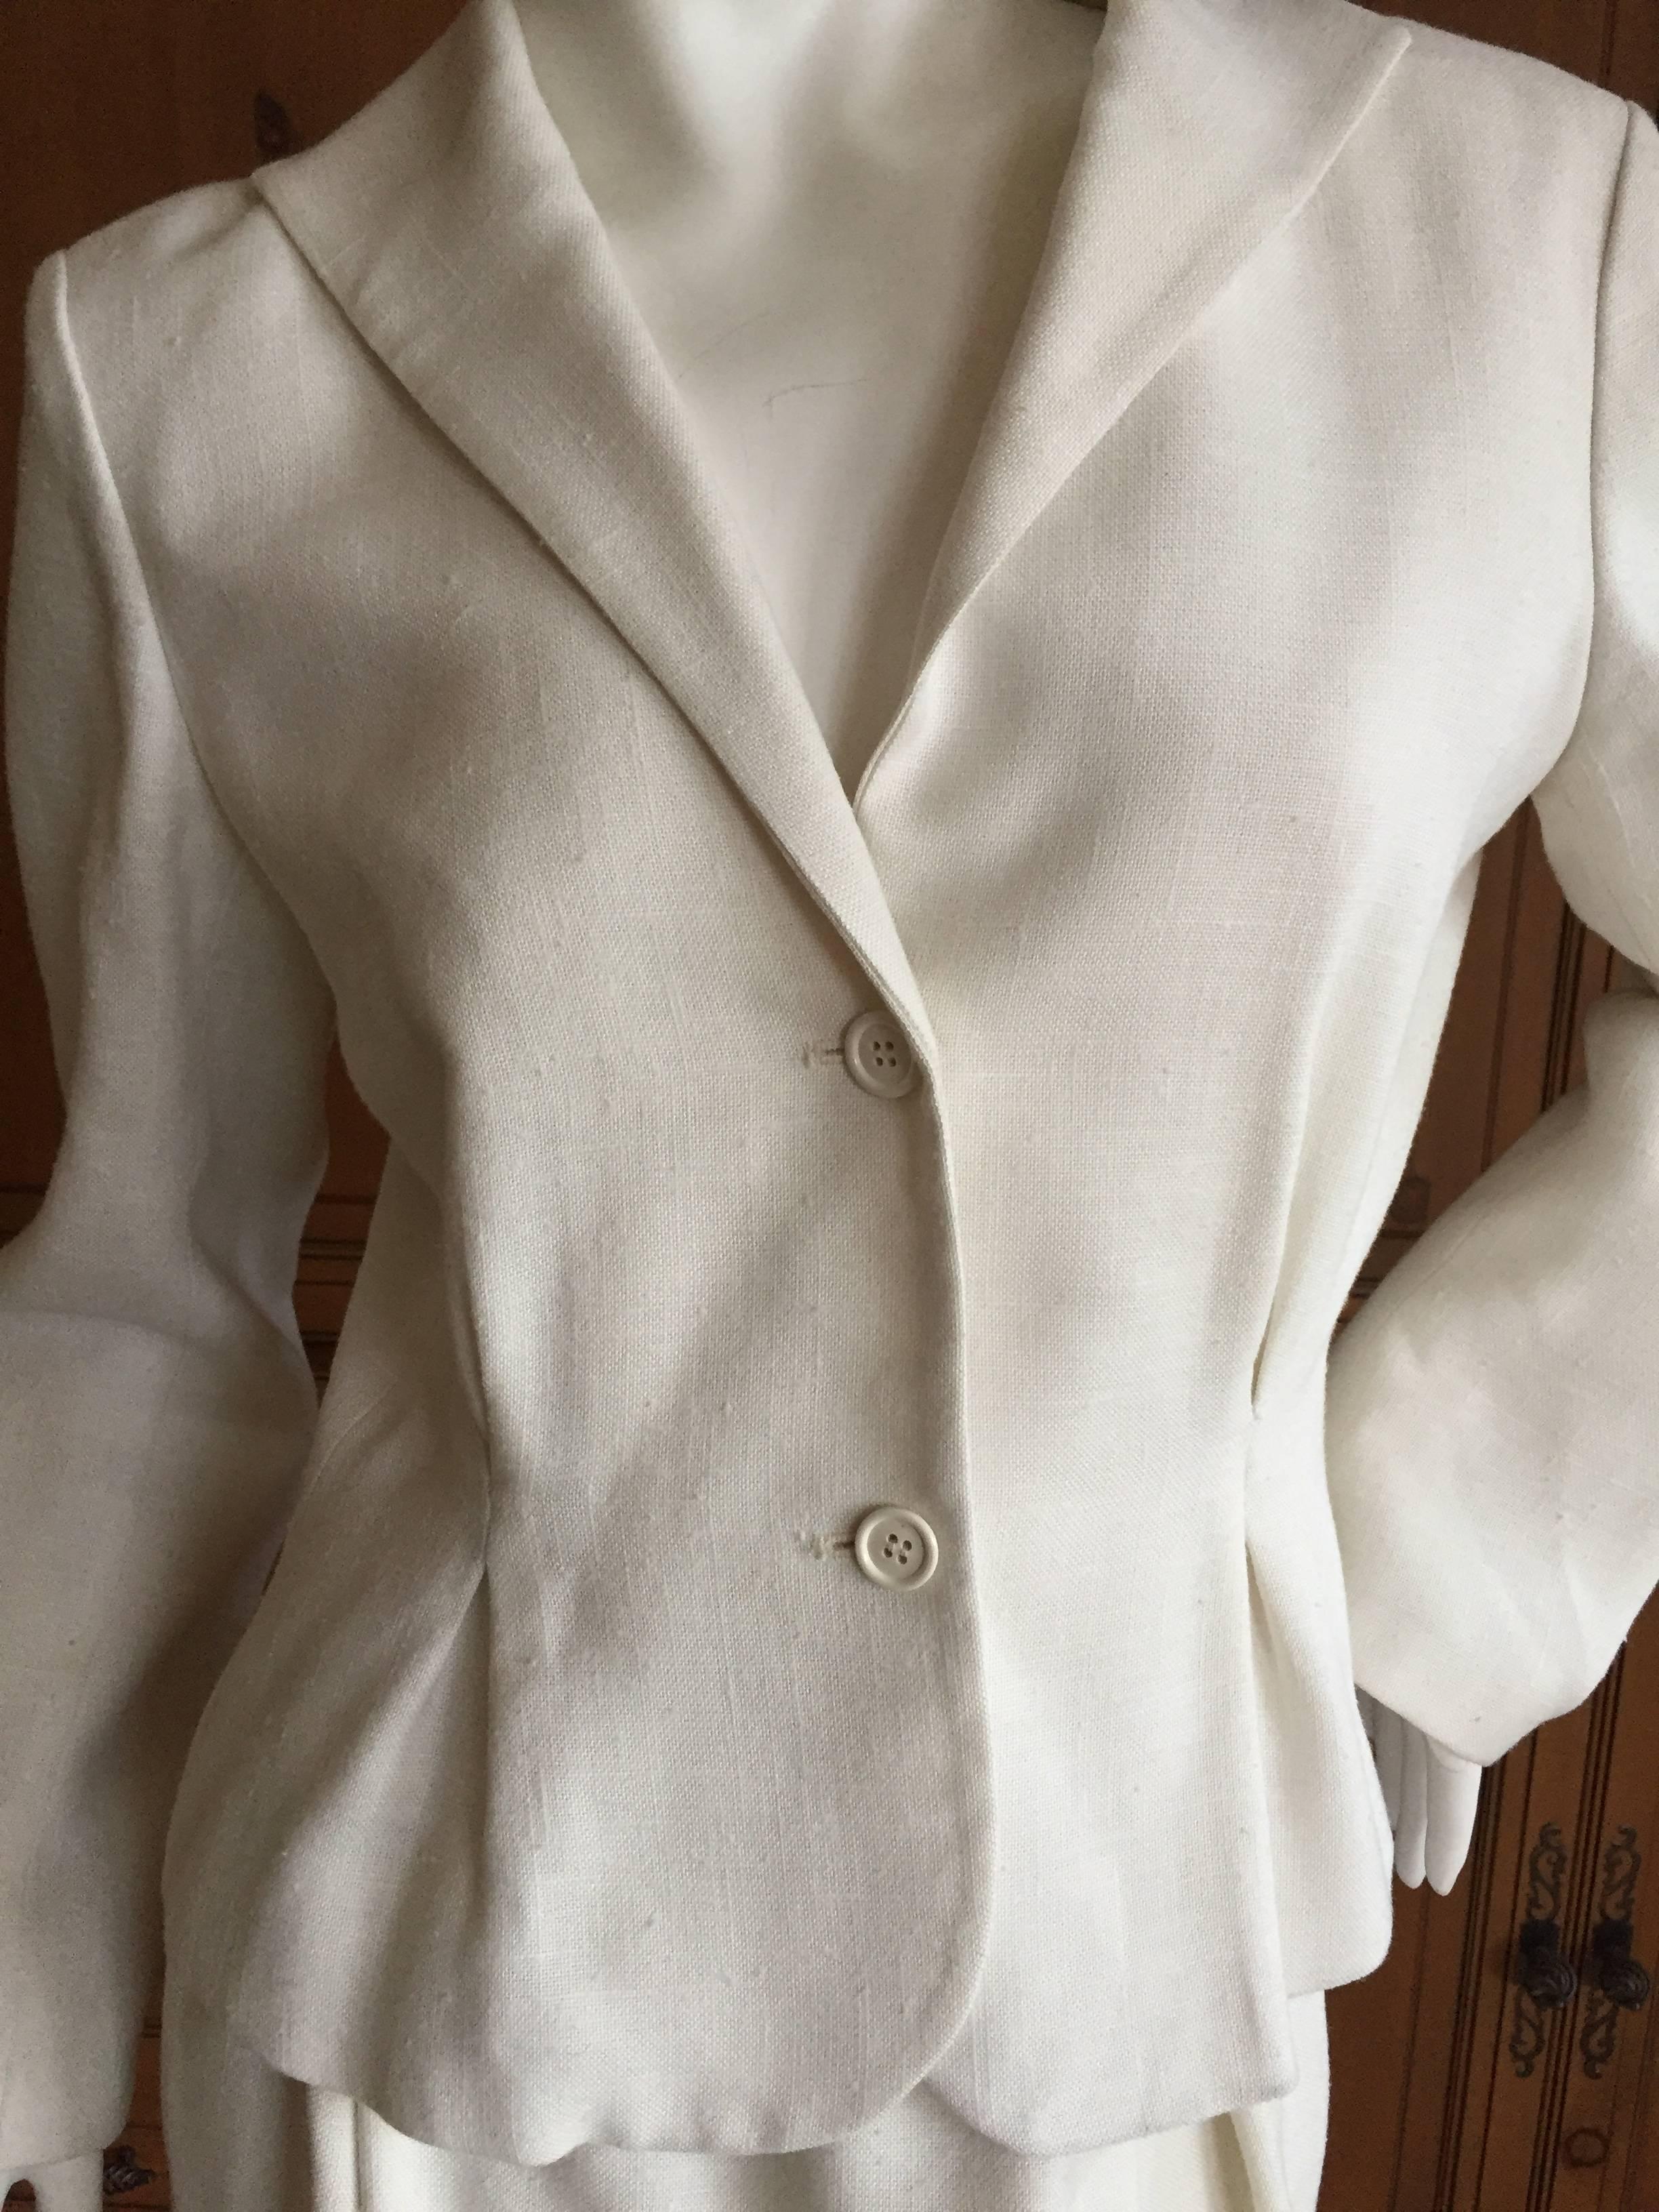 Halston 1970's Ivory Linen Skirt Suit from I.Magnin In Excellent Condition For Sale In Cloverdale, CA